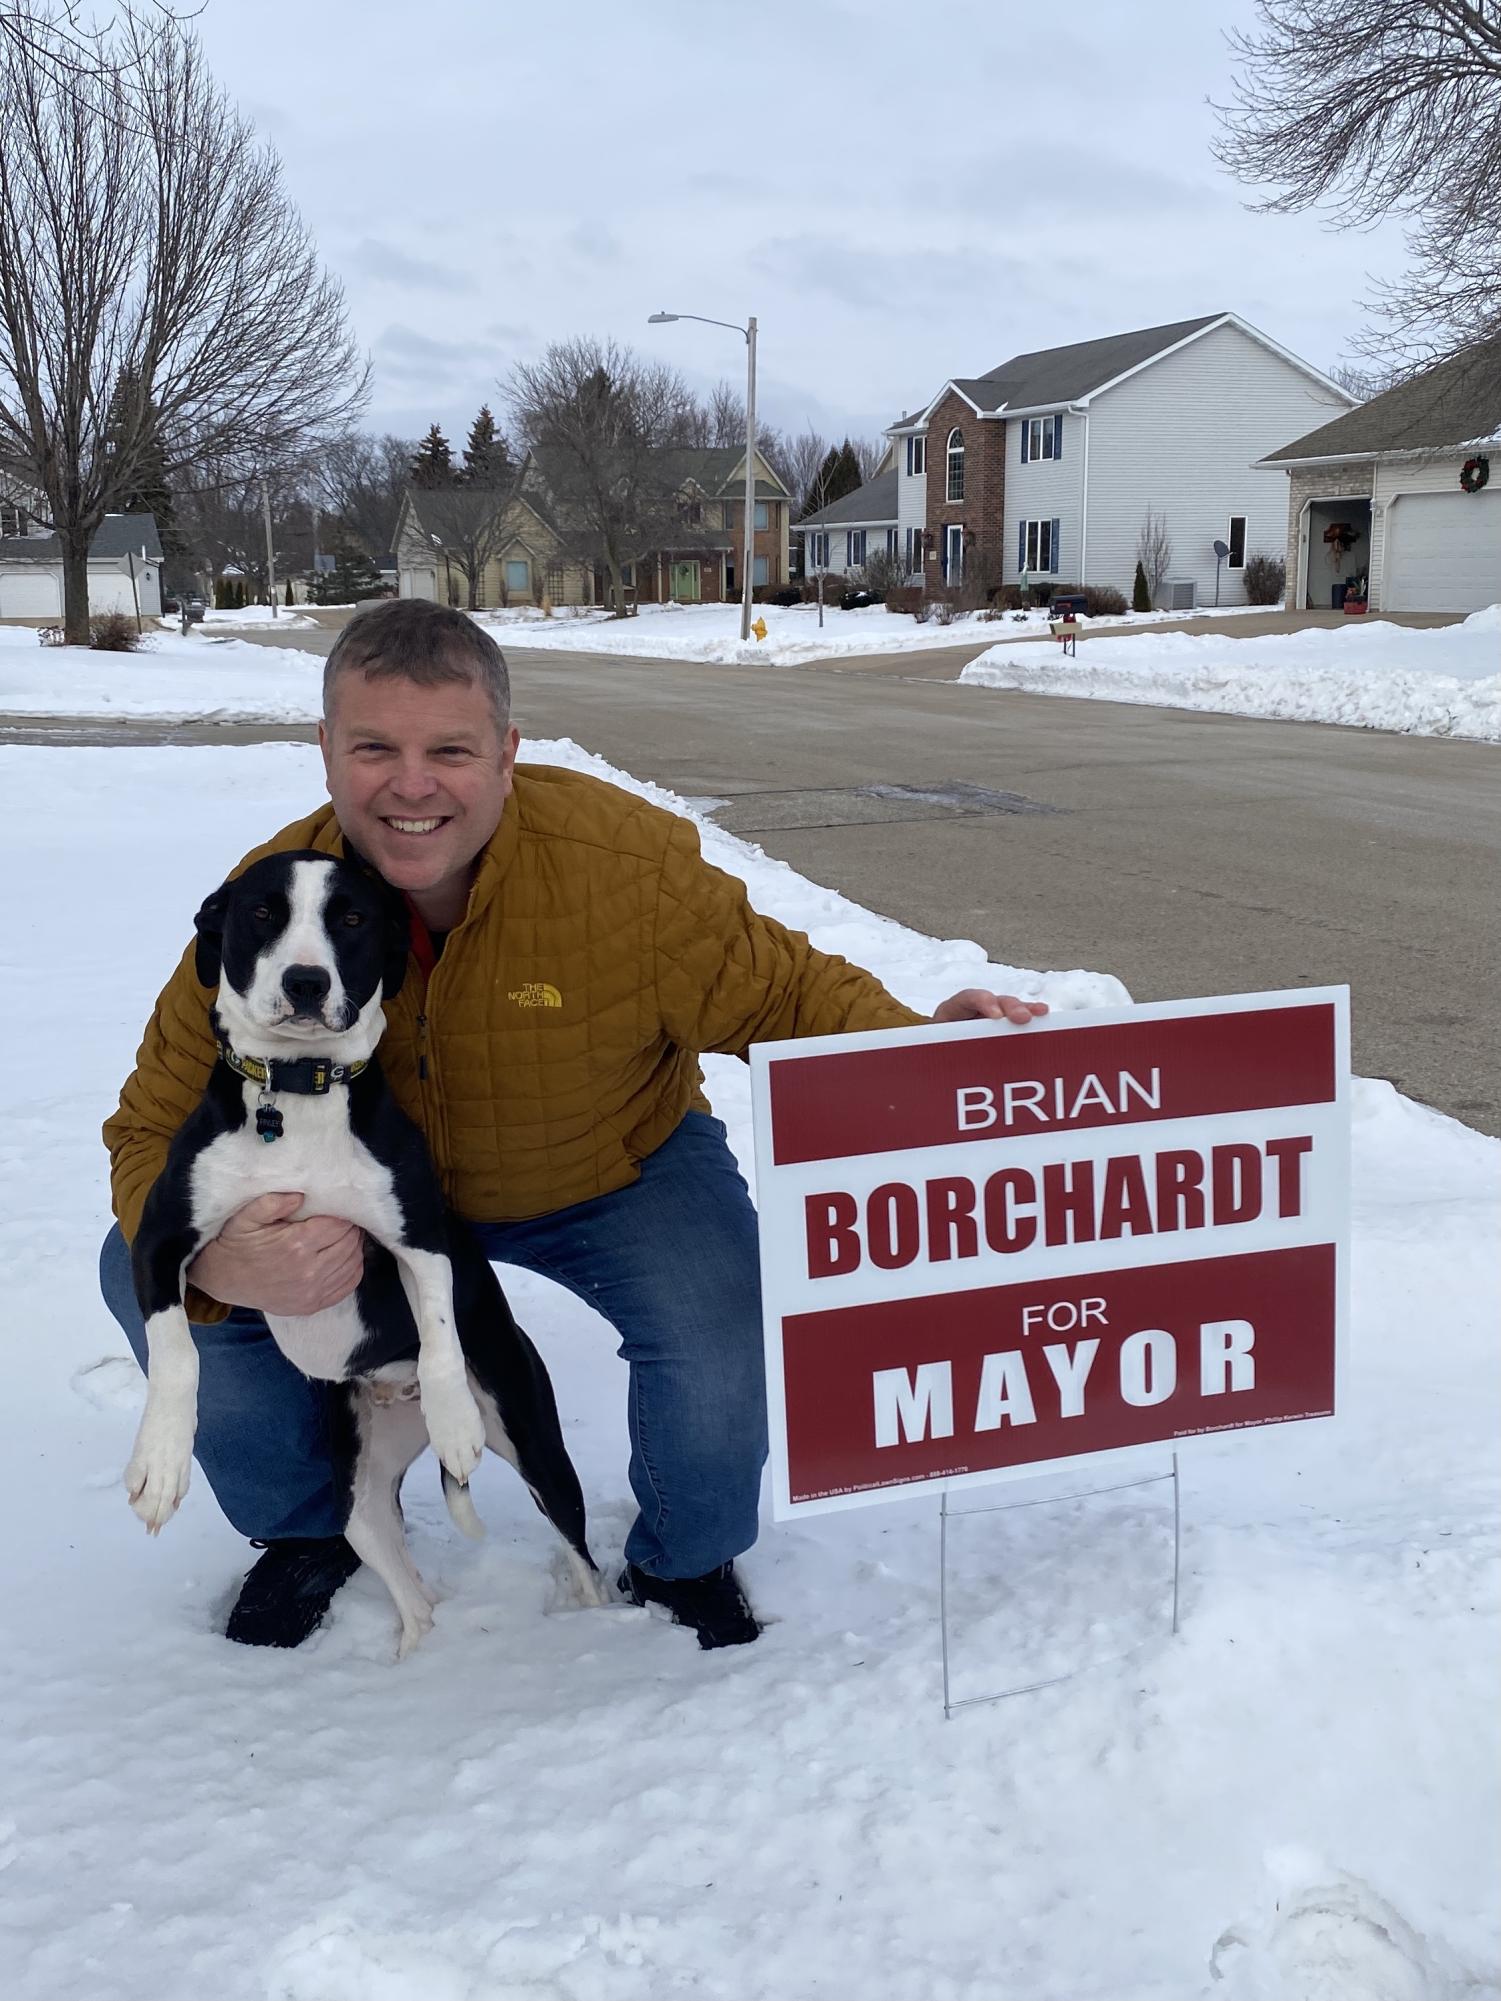 Brian Borchardt crowching, posing next to a sign that reads "Brian Borchardt for Mayor" with his dog. 